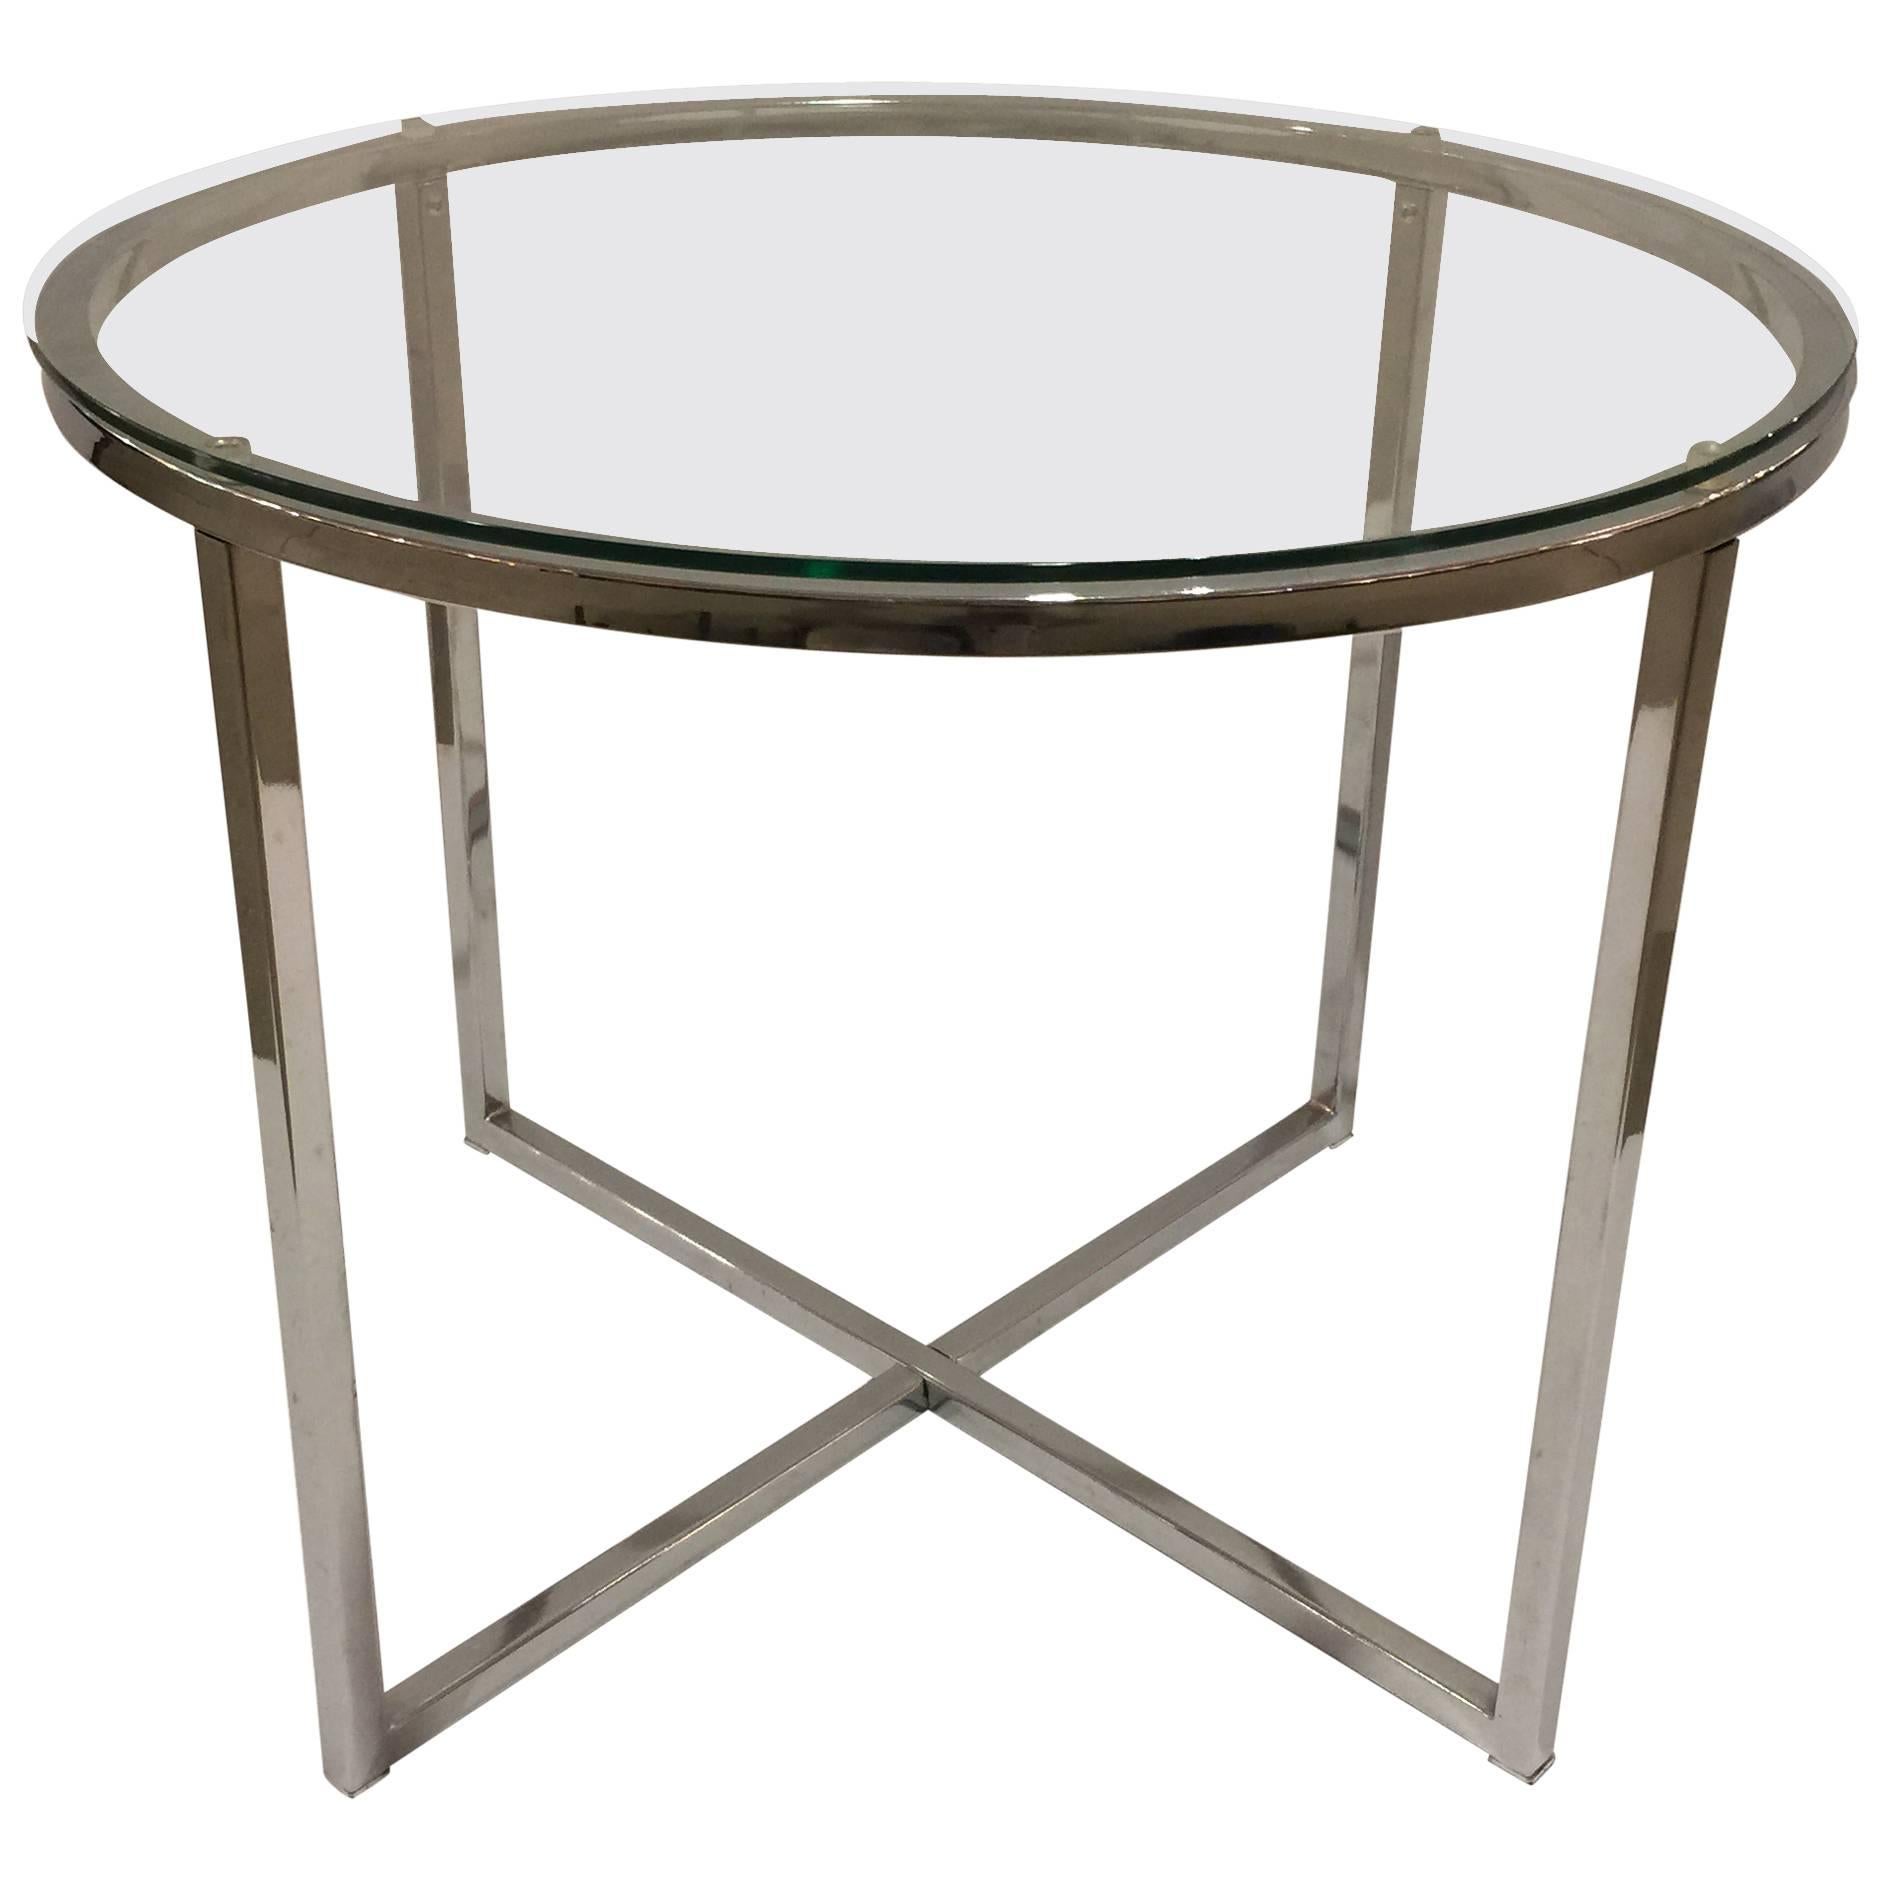 1970s Chrome and Glass Round End Table attributed to Milo Baughman